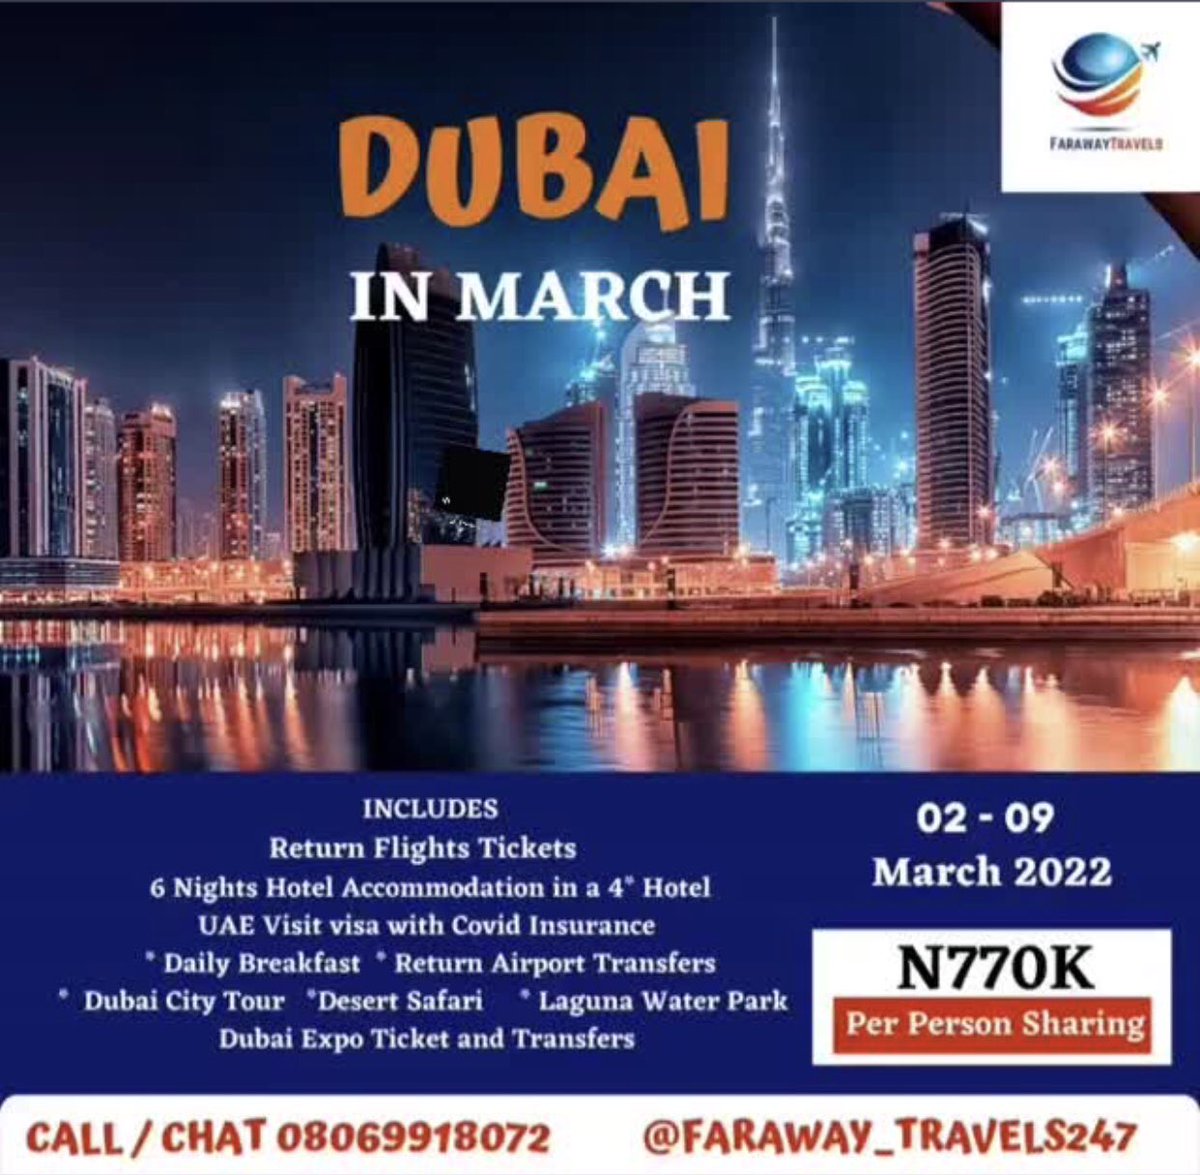 Still selling, if you haven’t book a slot you still can 

Chat us : wa.link/lwtgyg to join this group Trip in March #holidayplanners #VisitDubai